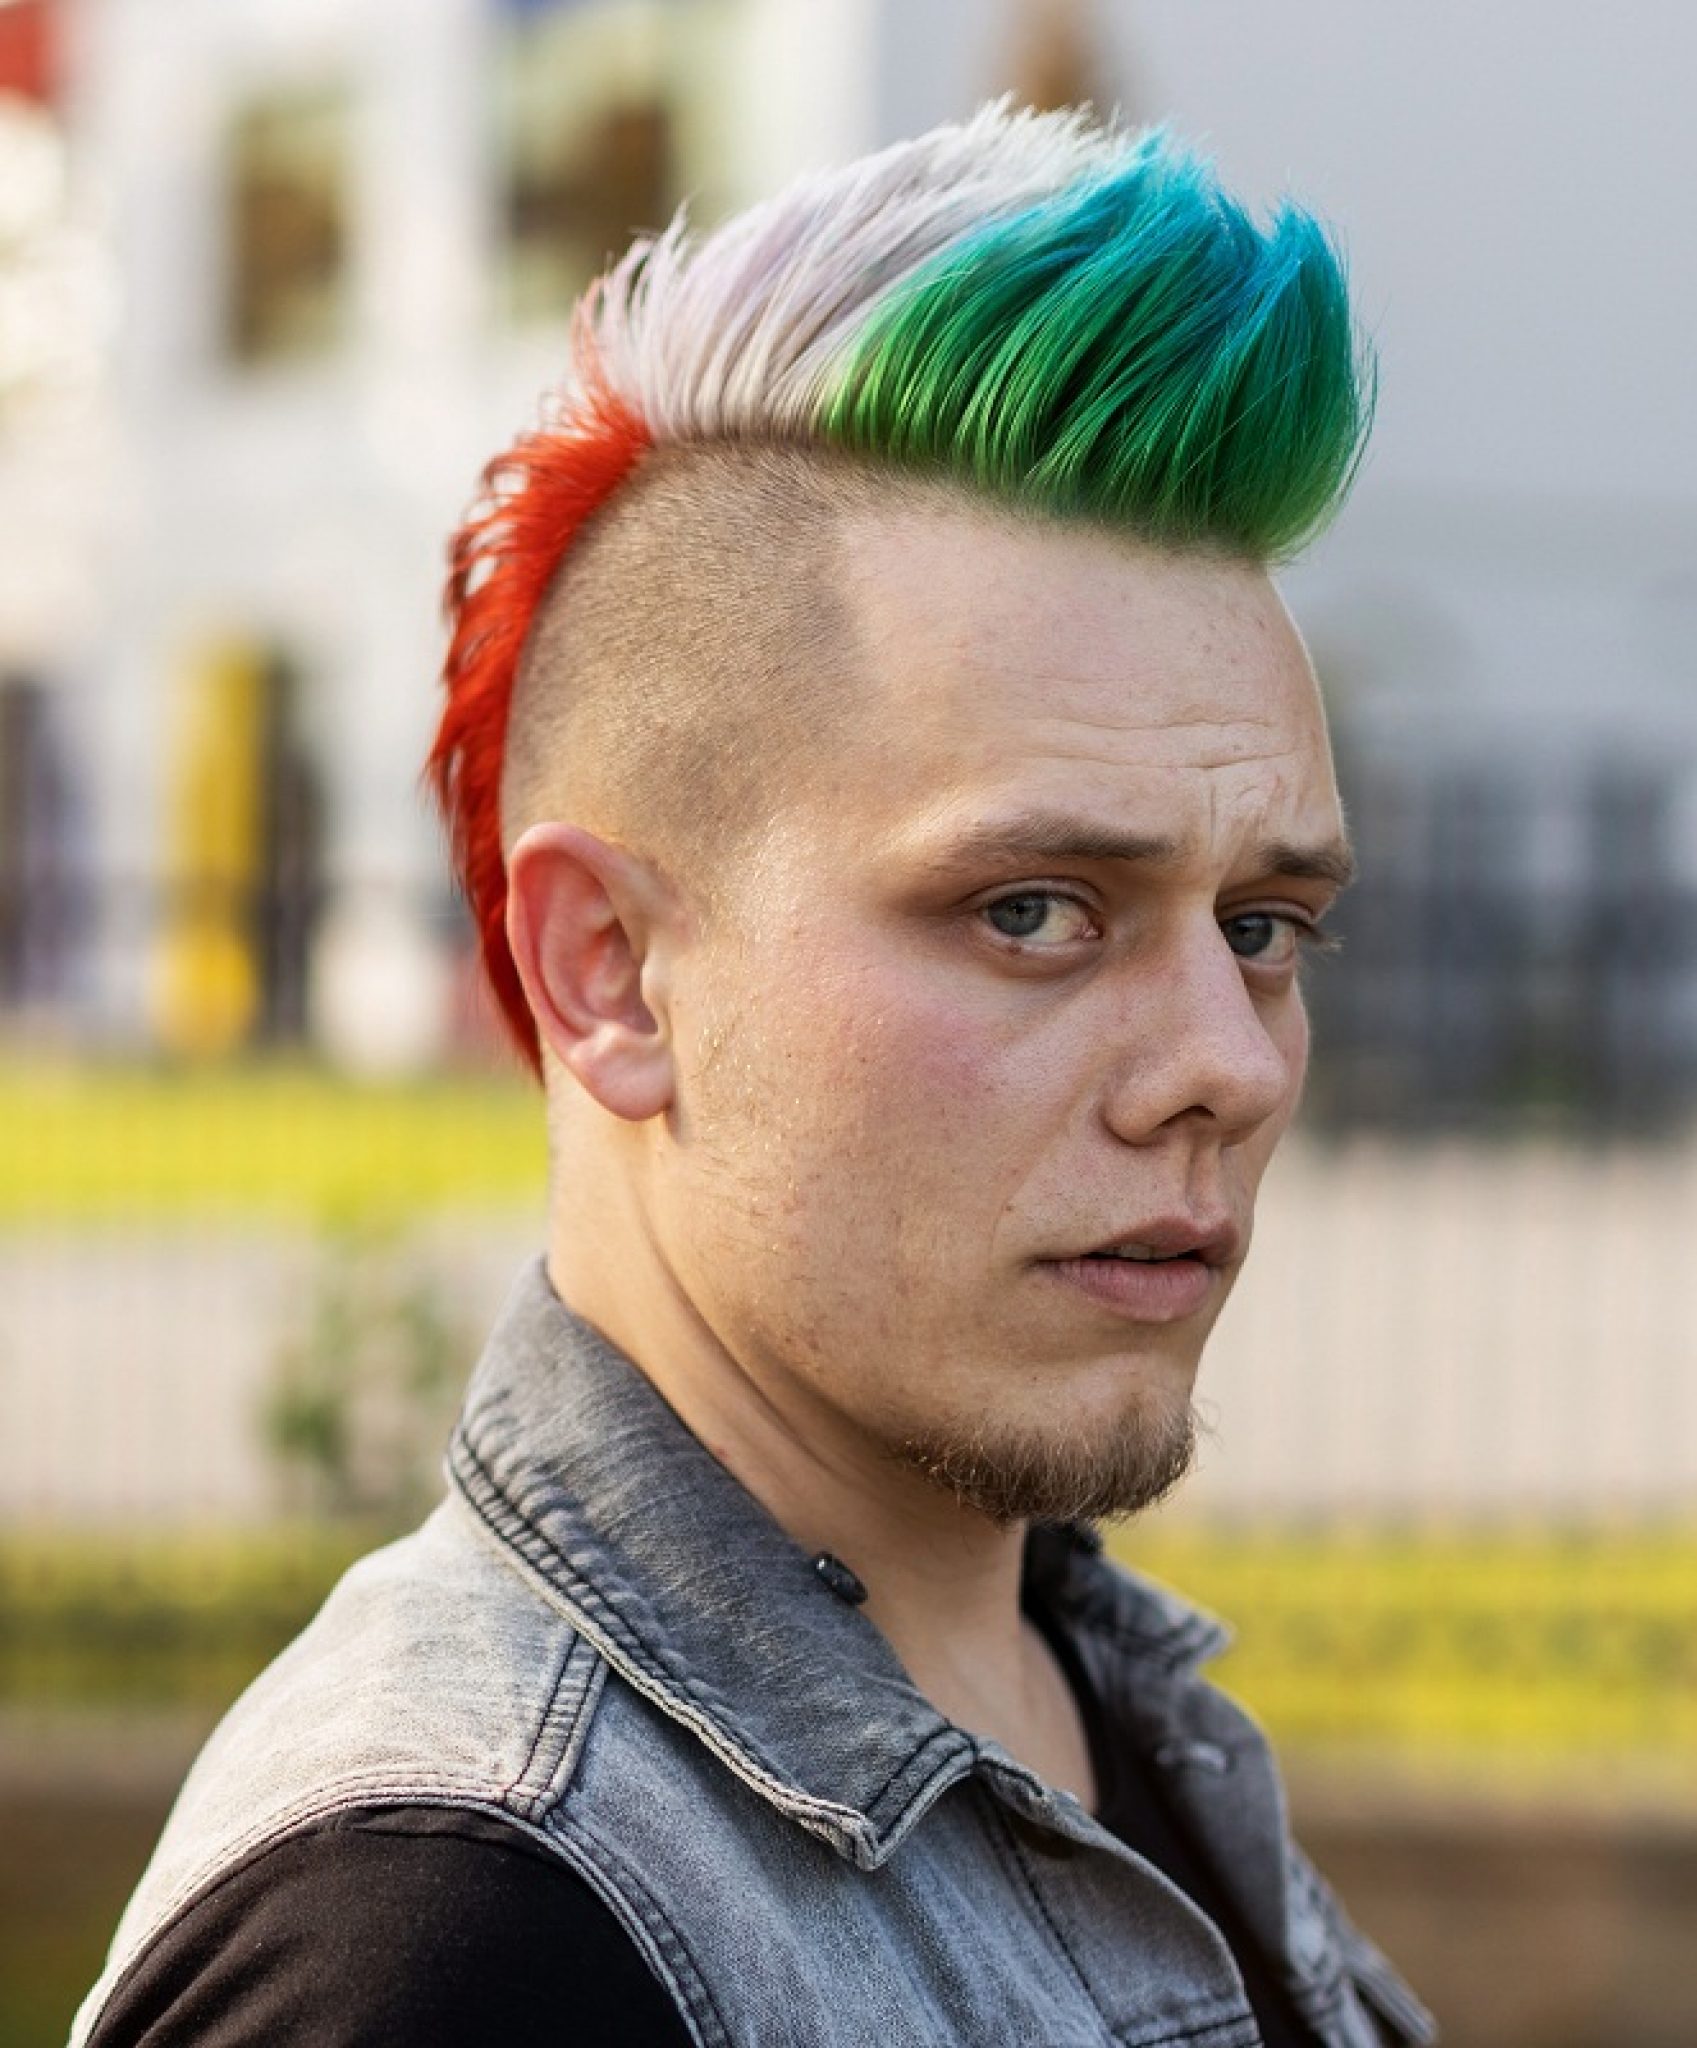 Punk Skullet Haircut-15 Cool Reverse Mohawk Hairstyles for Men